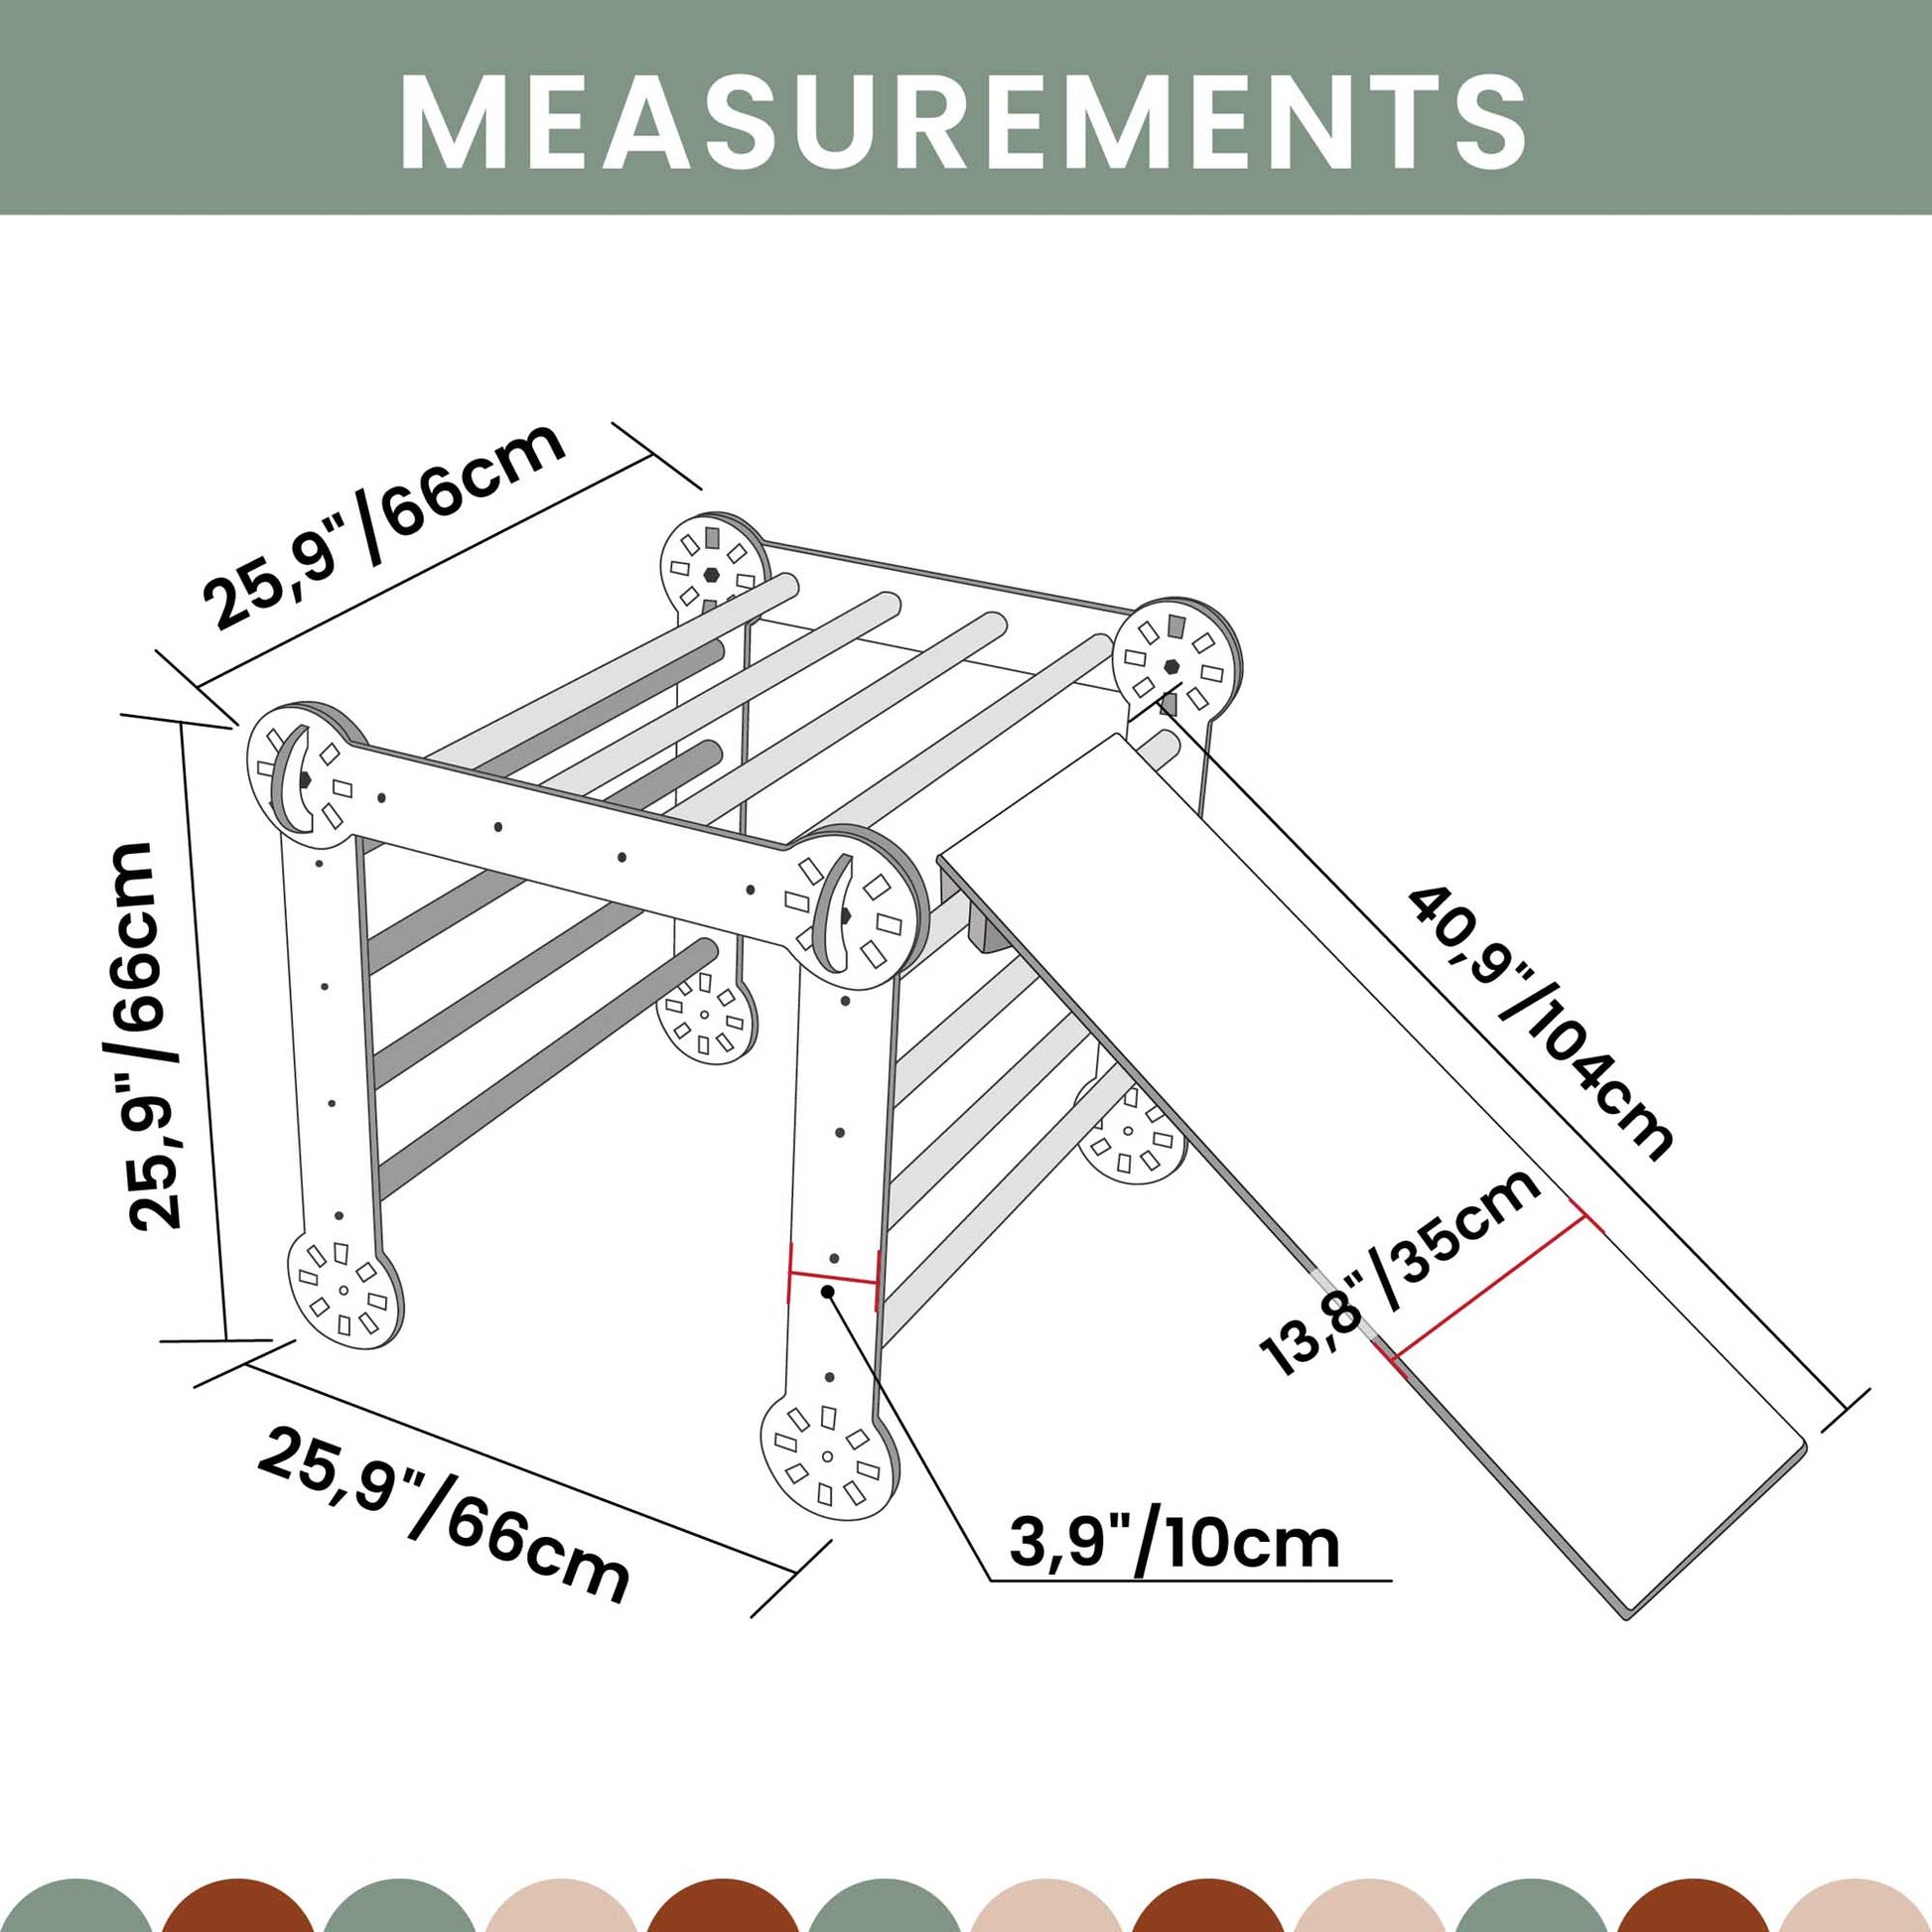 A durable diagram illustrating the measurements of a Foldable climbing triangle + Transformable climbing gym + a ramp play structure, with options for convenient storage.